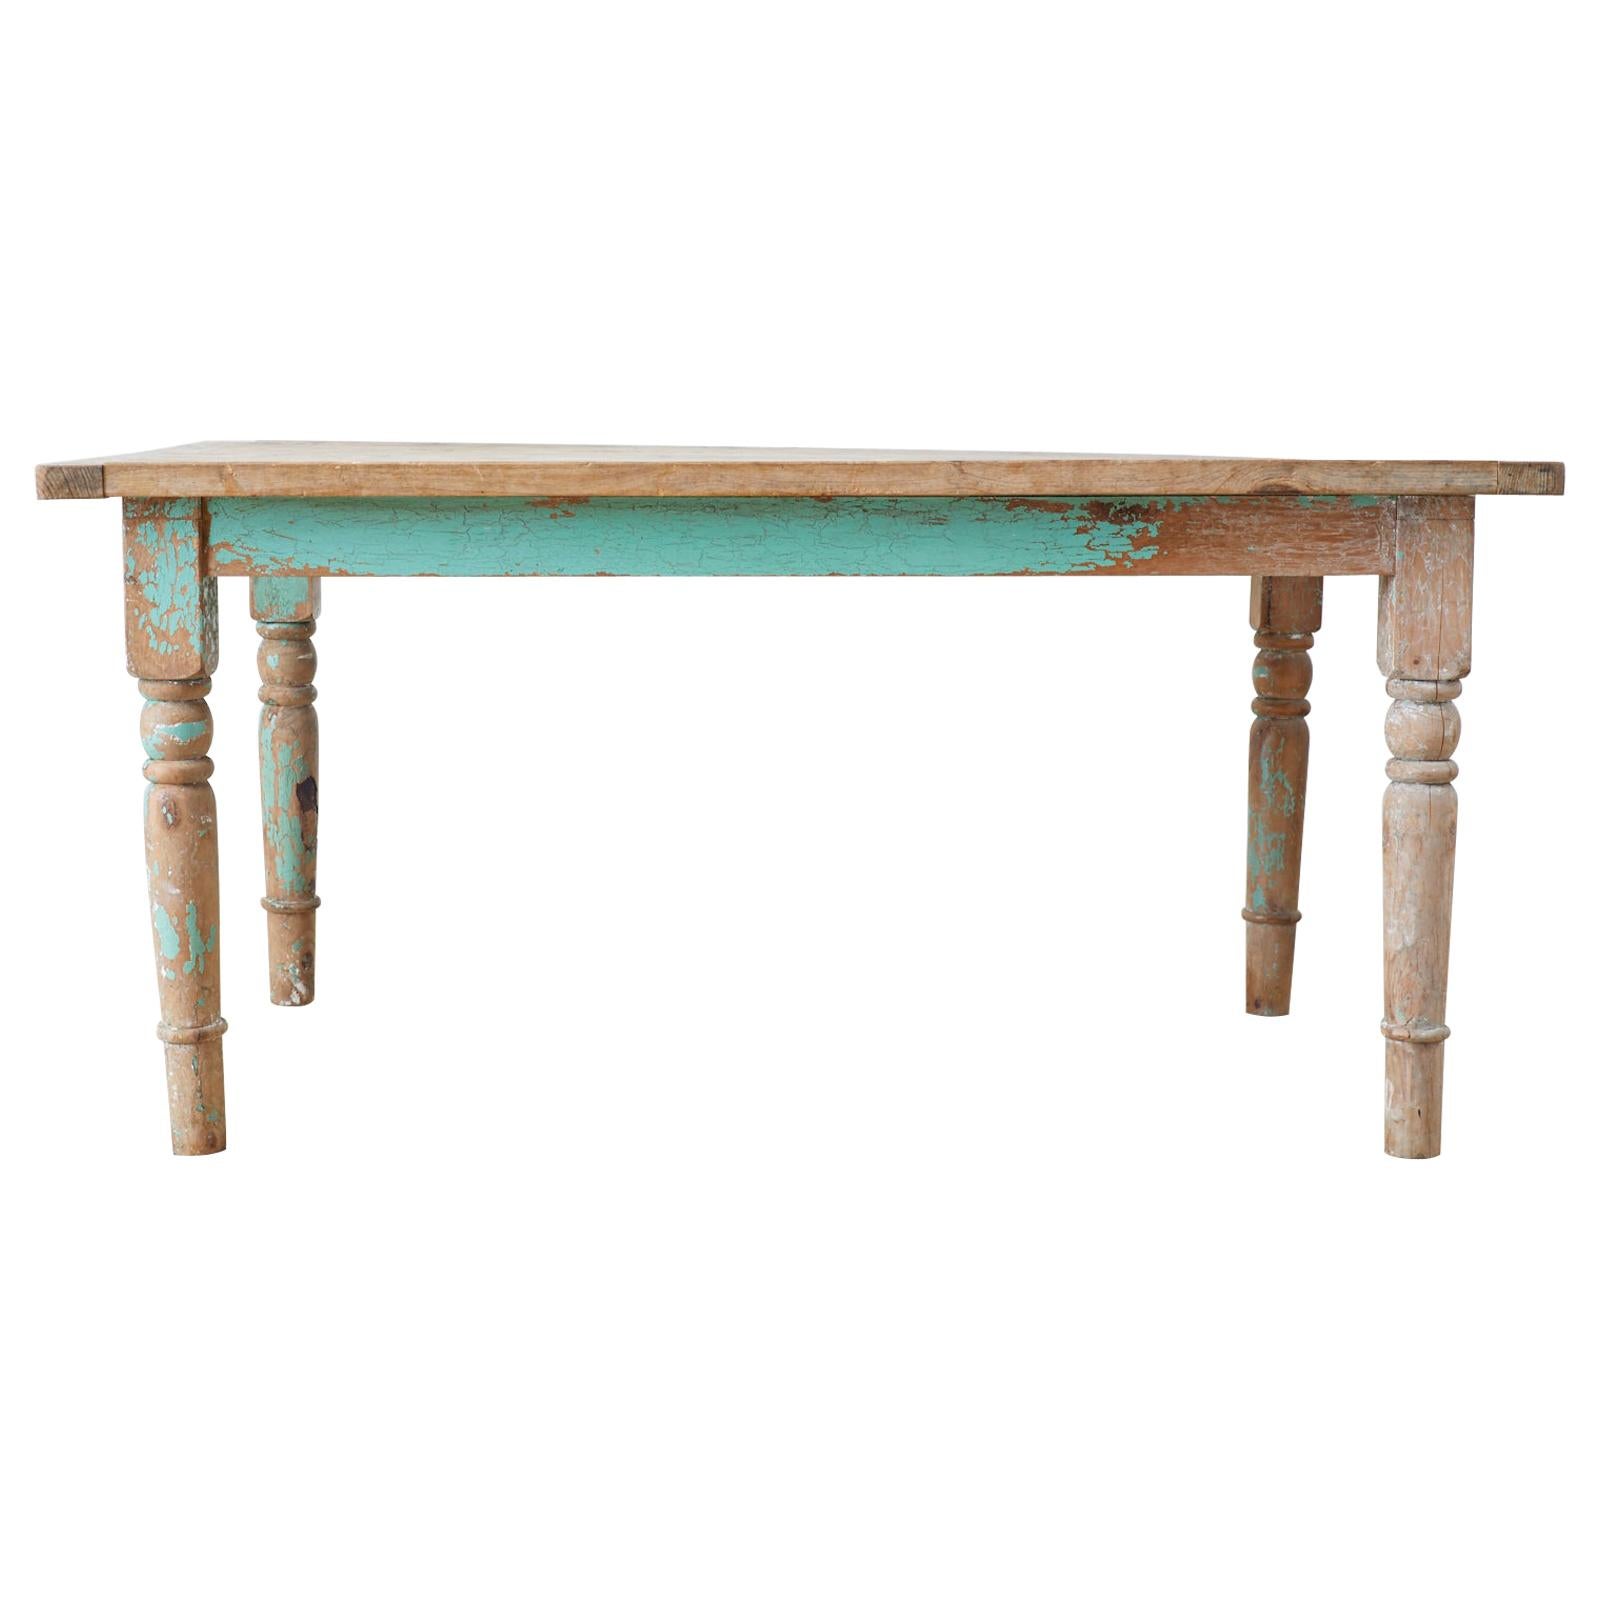 Rustic French Pine Country Farmhouse Dining Table